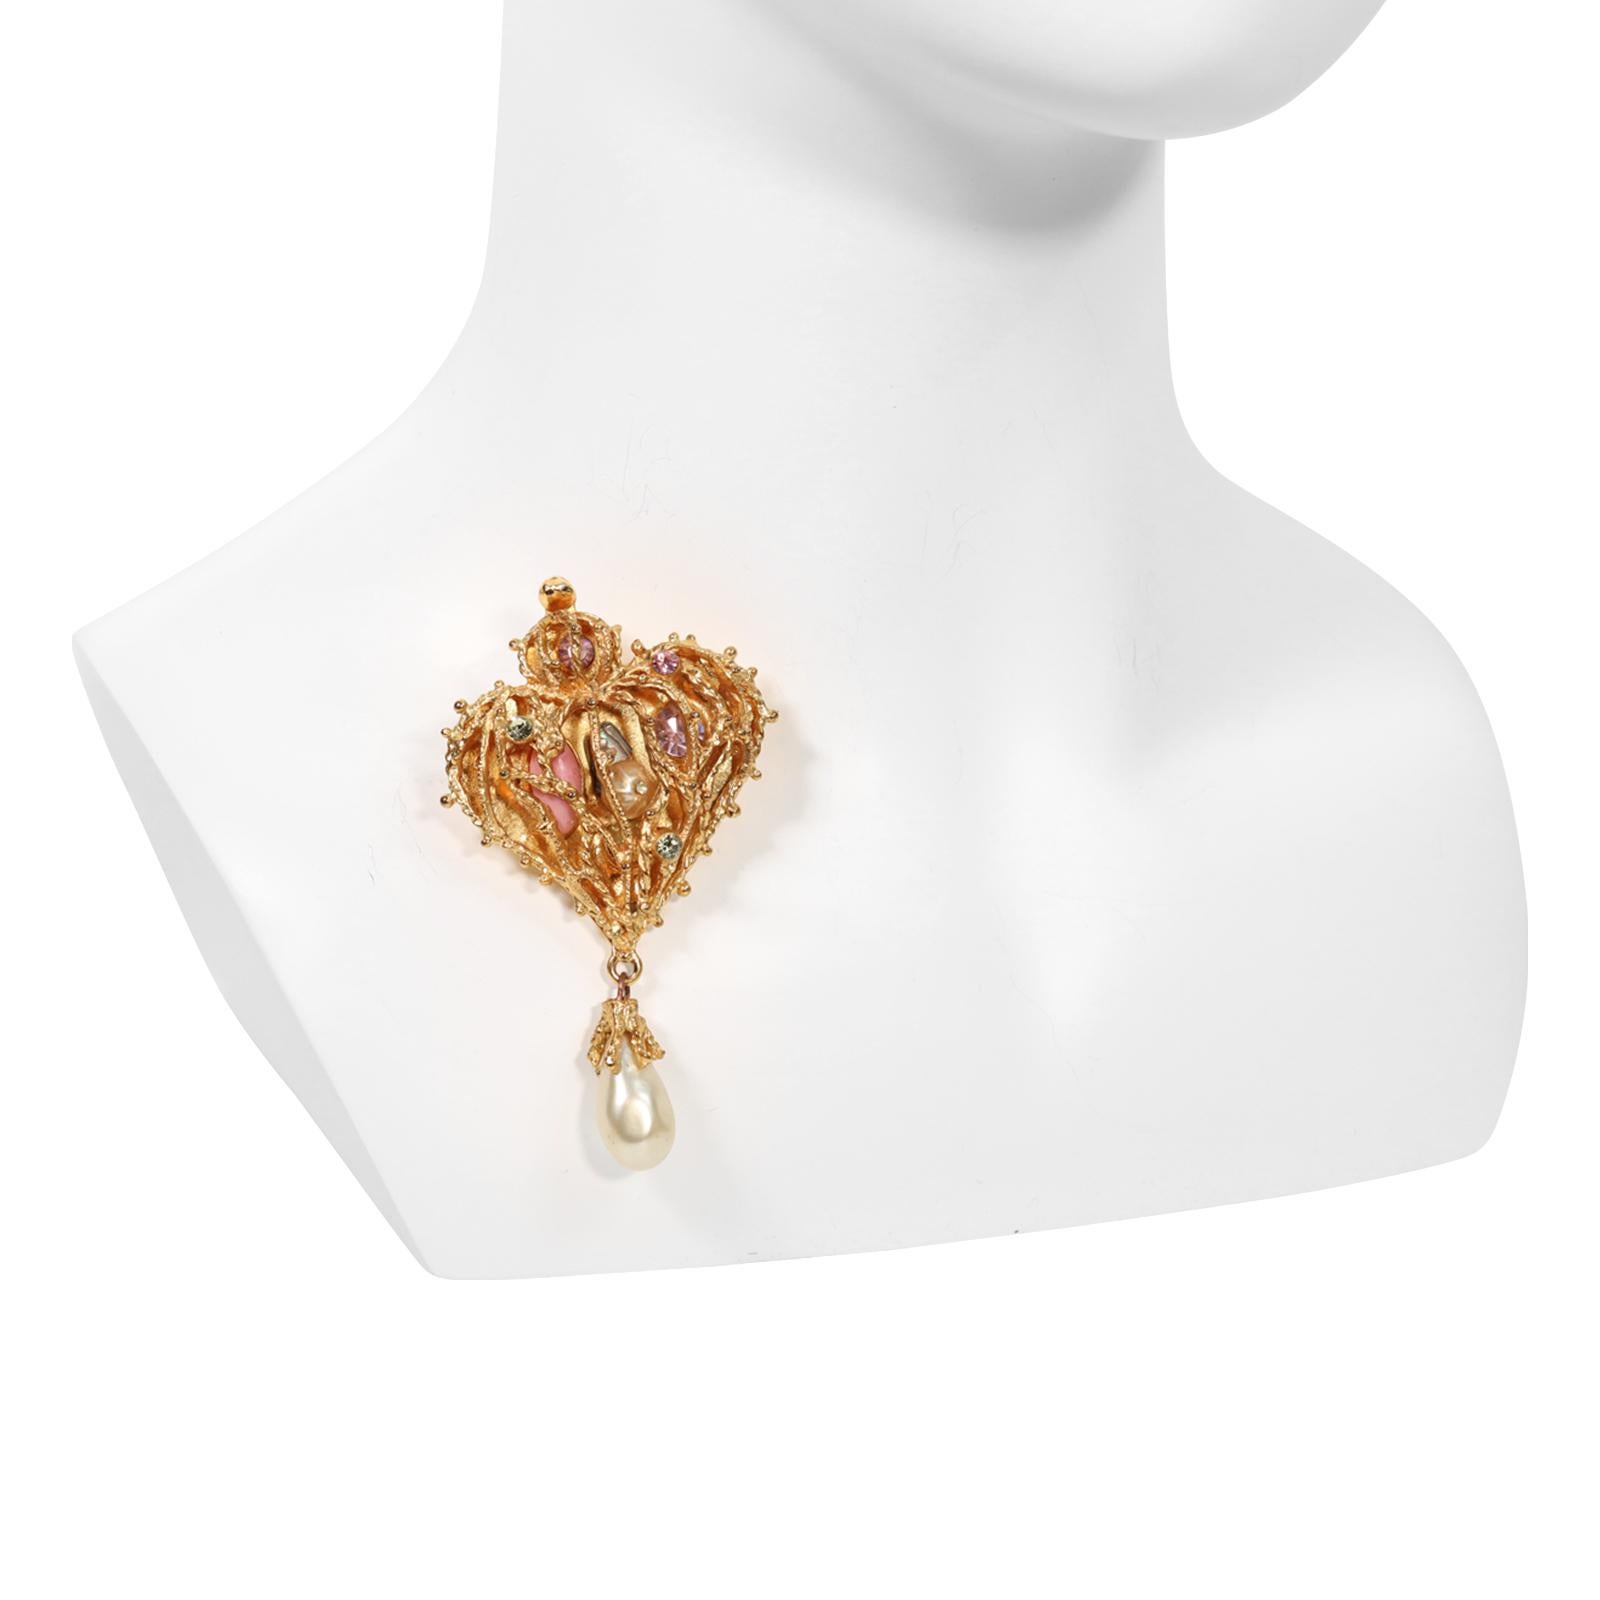 Vintage Christian Lacroix Dangling Gold Tone Pearl Brooch with Pearl, Crystal, Cabochon and small Crystals in Gilded Cage like Heart with Dangling Pear Shaped Faux Pearl. 

This is so special as the cage has stones inside of it.  You can see the